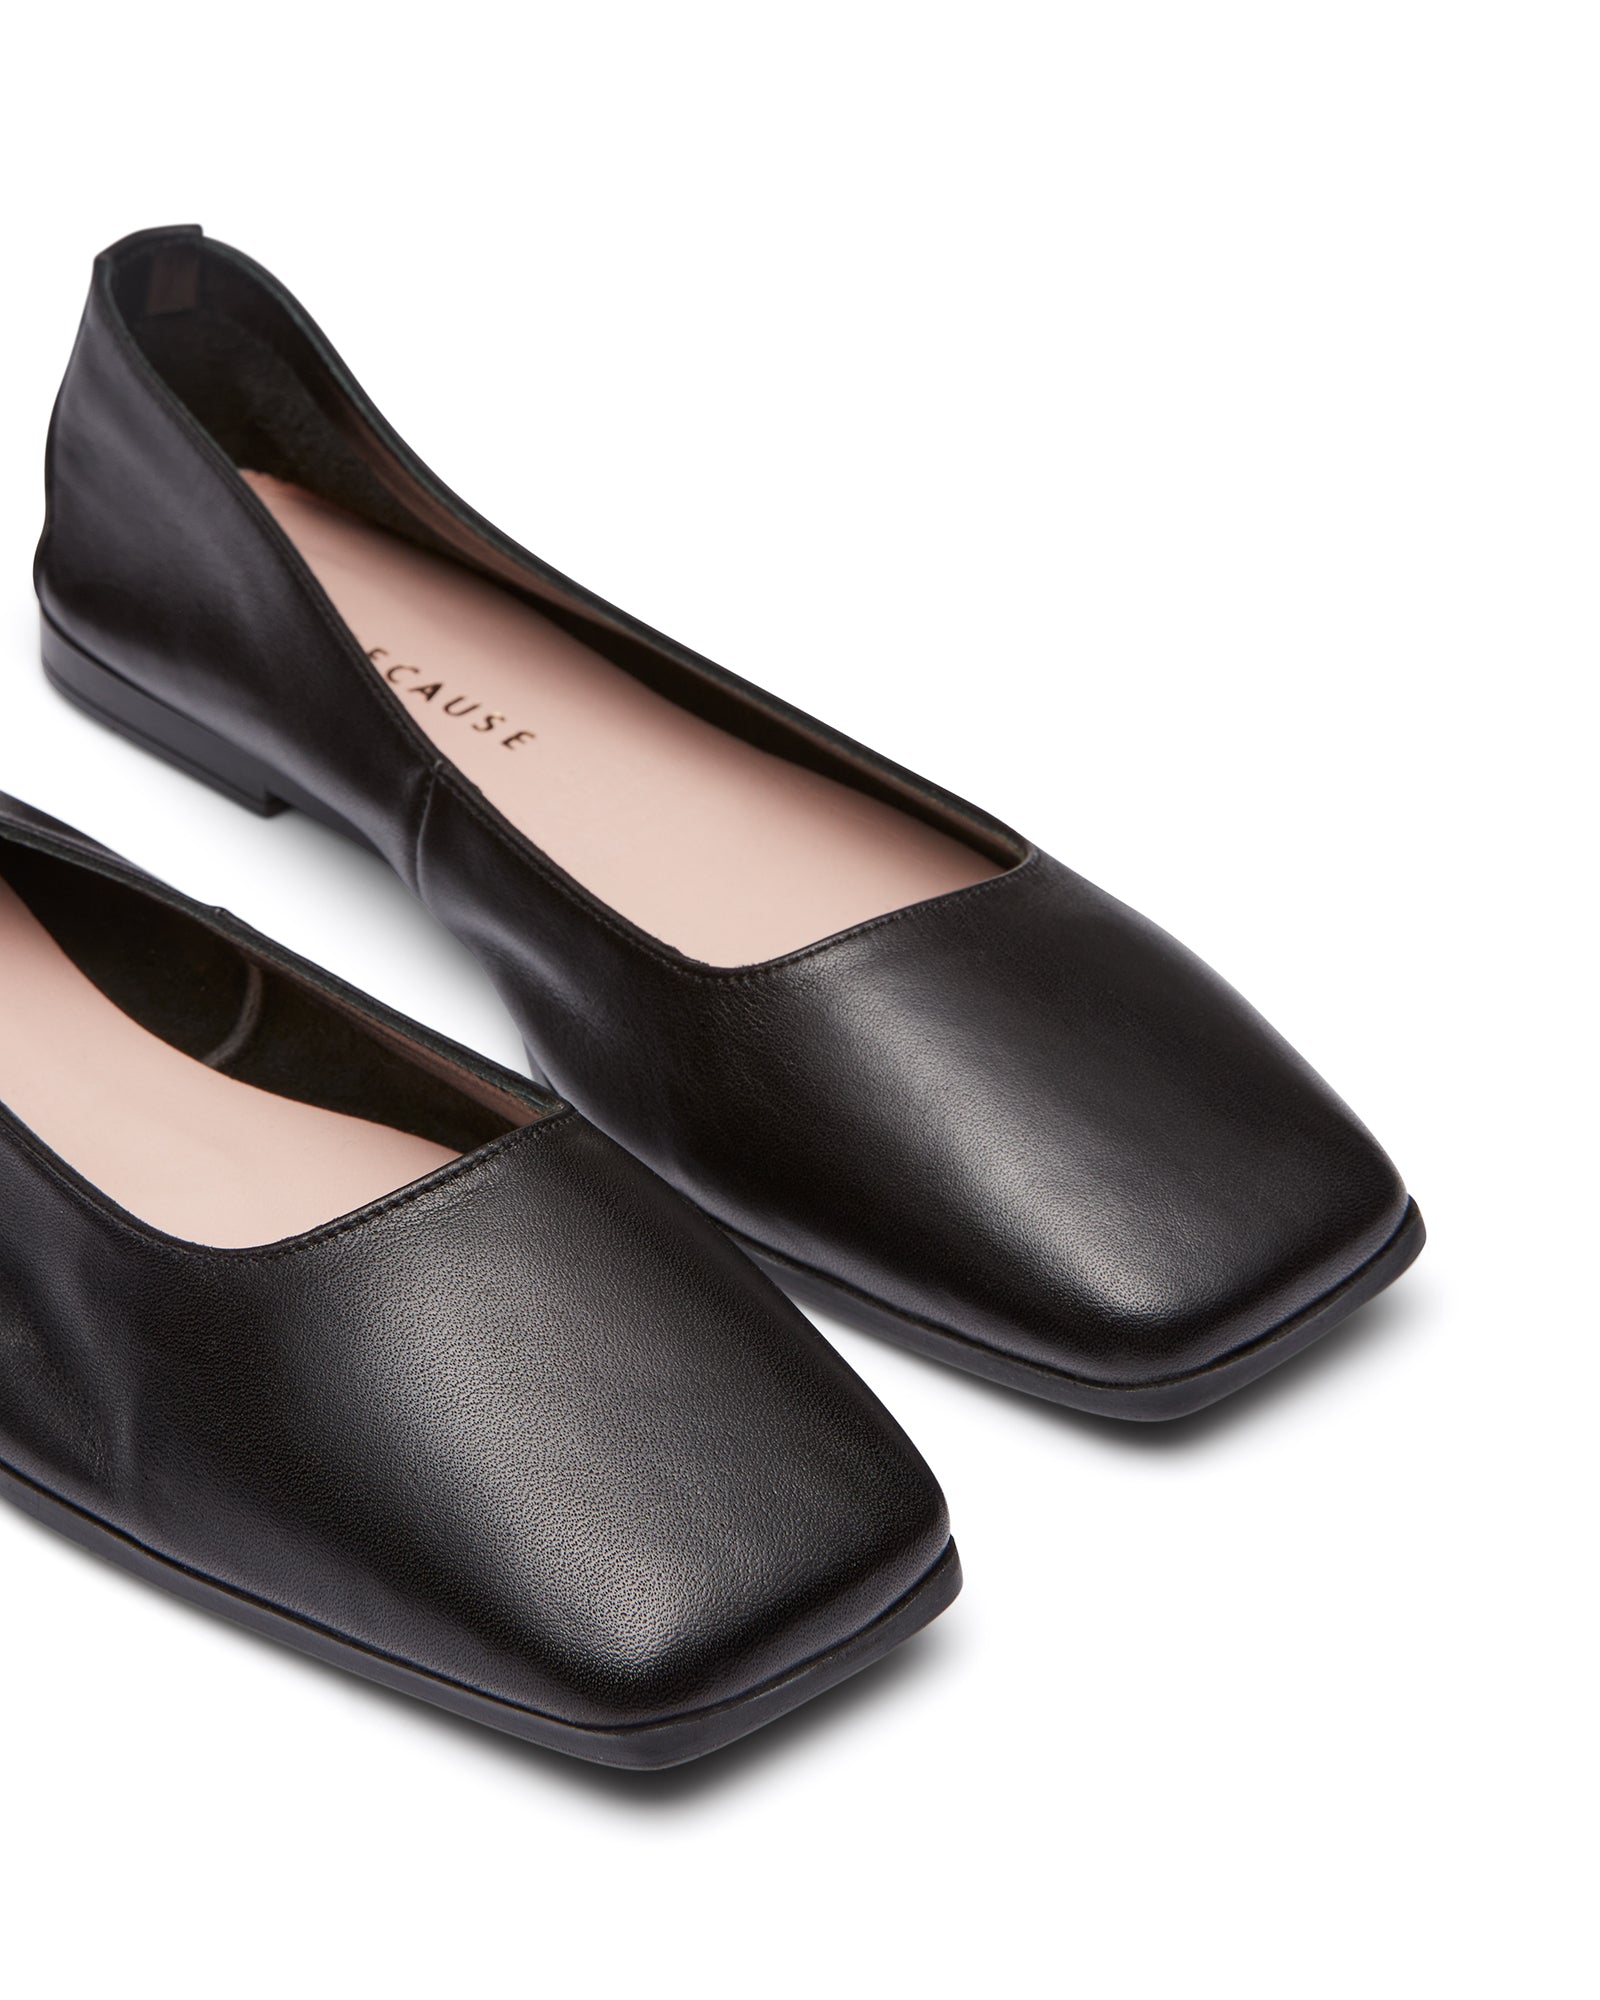 Just Because Shoes Beck Black | Leather Flats | Ballet | Slip On | Square